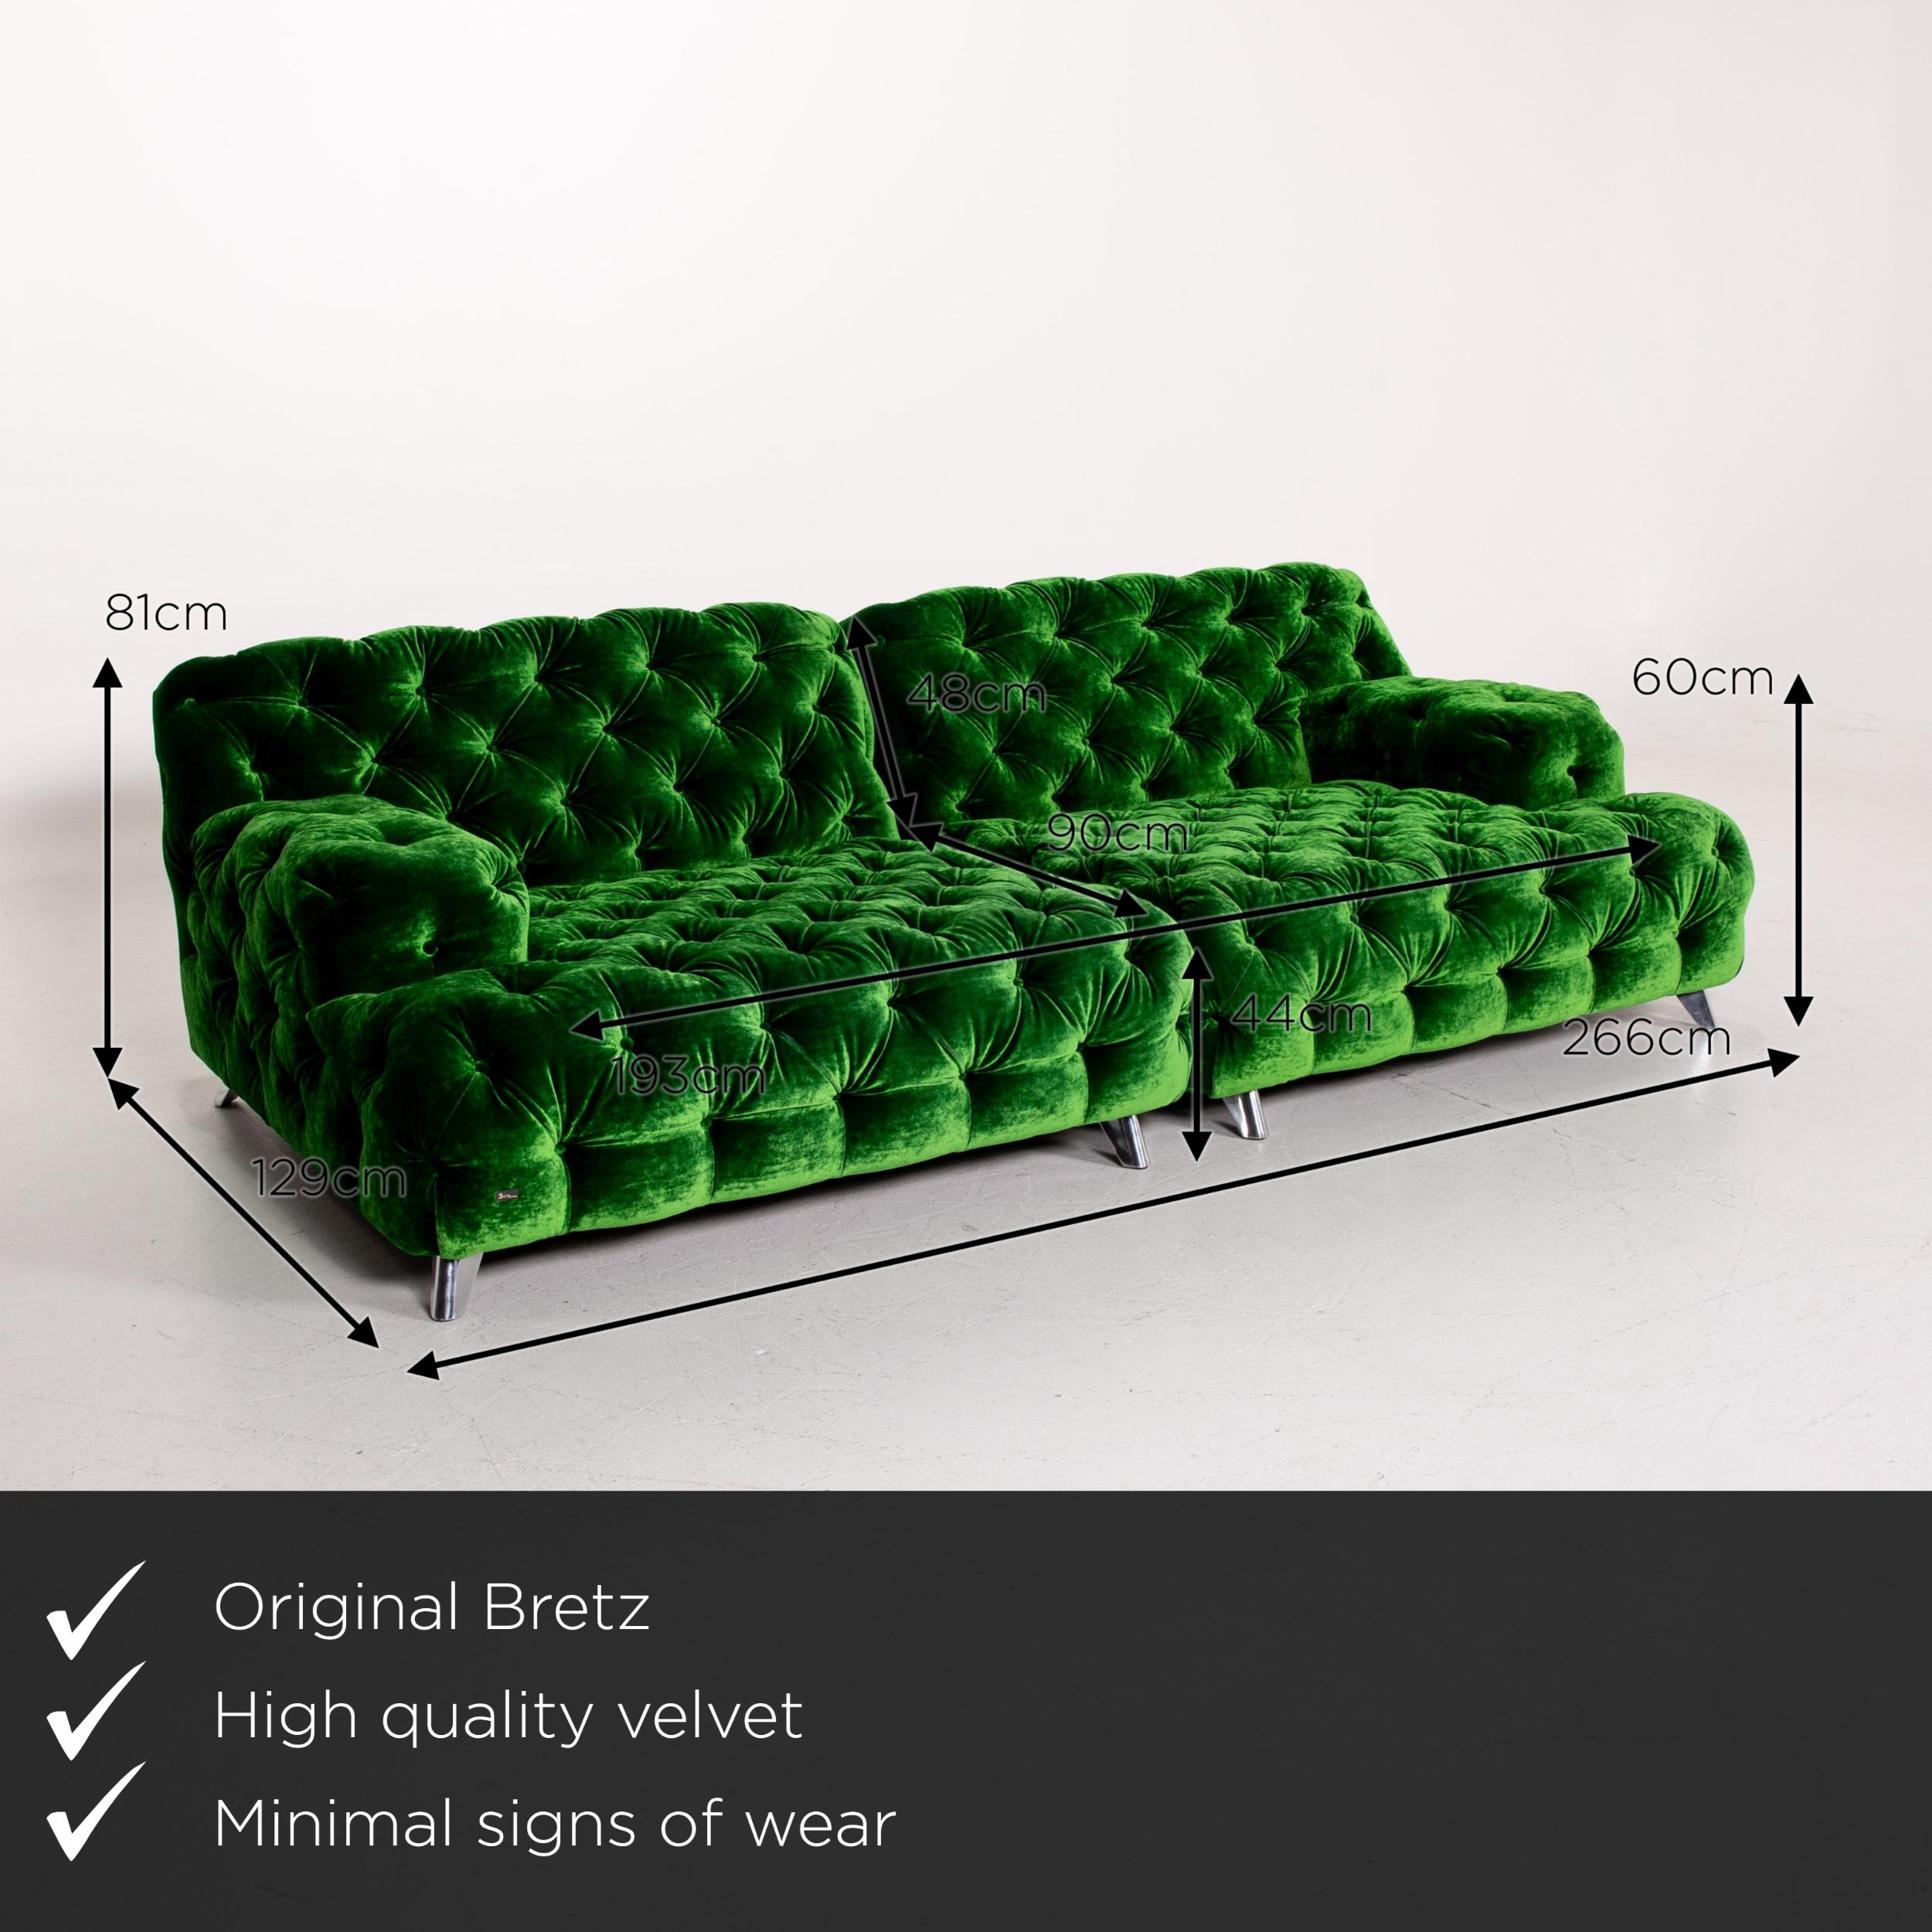 We present to you a Bretz Cocoa island velvet fabric sofa green four-seat couch.
   
 

 Product measurements in centimeters:
 

Depth 129
Width 266
Height 81
Seat height 44
Rest height 60
Seat depth 90
Seat width 193
Back height 48.